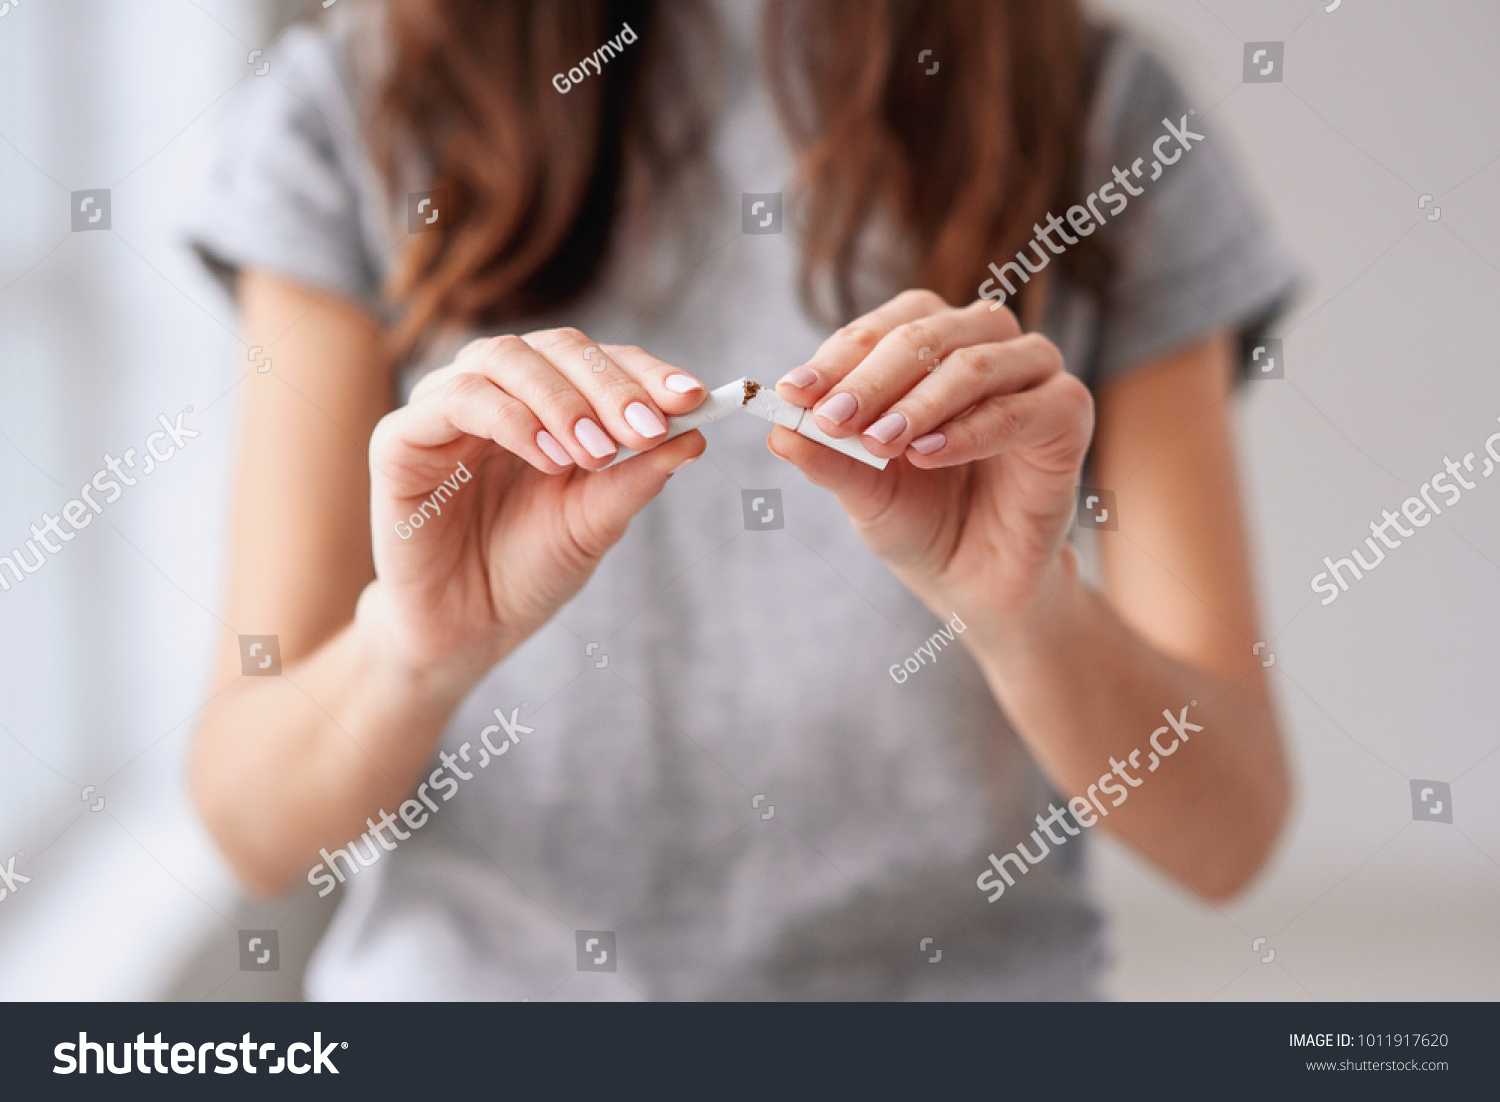 Stop smoking cigarettes concept. Portrait of beautiful smiling girl holding broken cigarette in hands. Happy female quitting smoking cigarettes. Quit bad habit, health care concept. No smoking. #1011917620